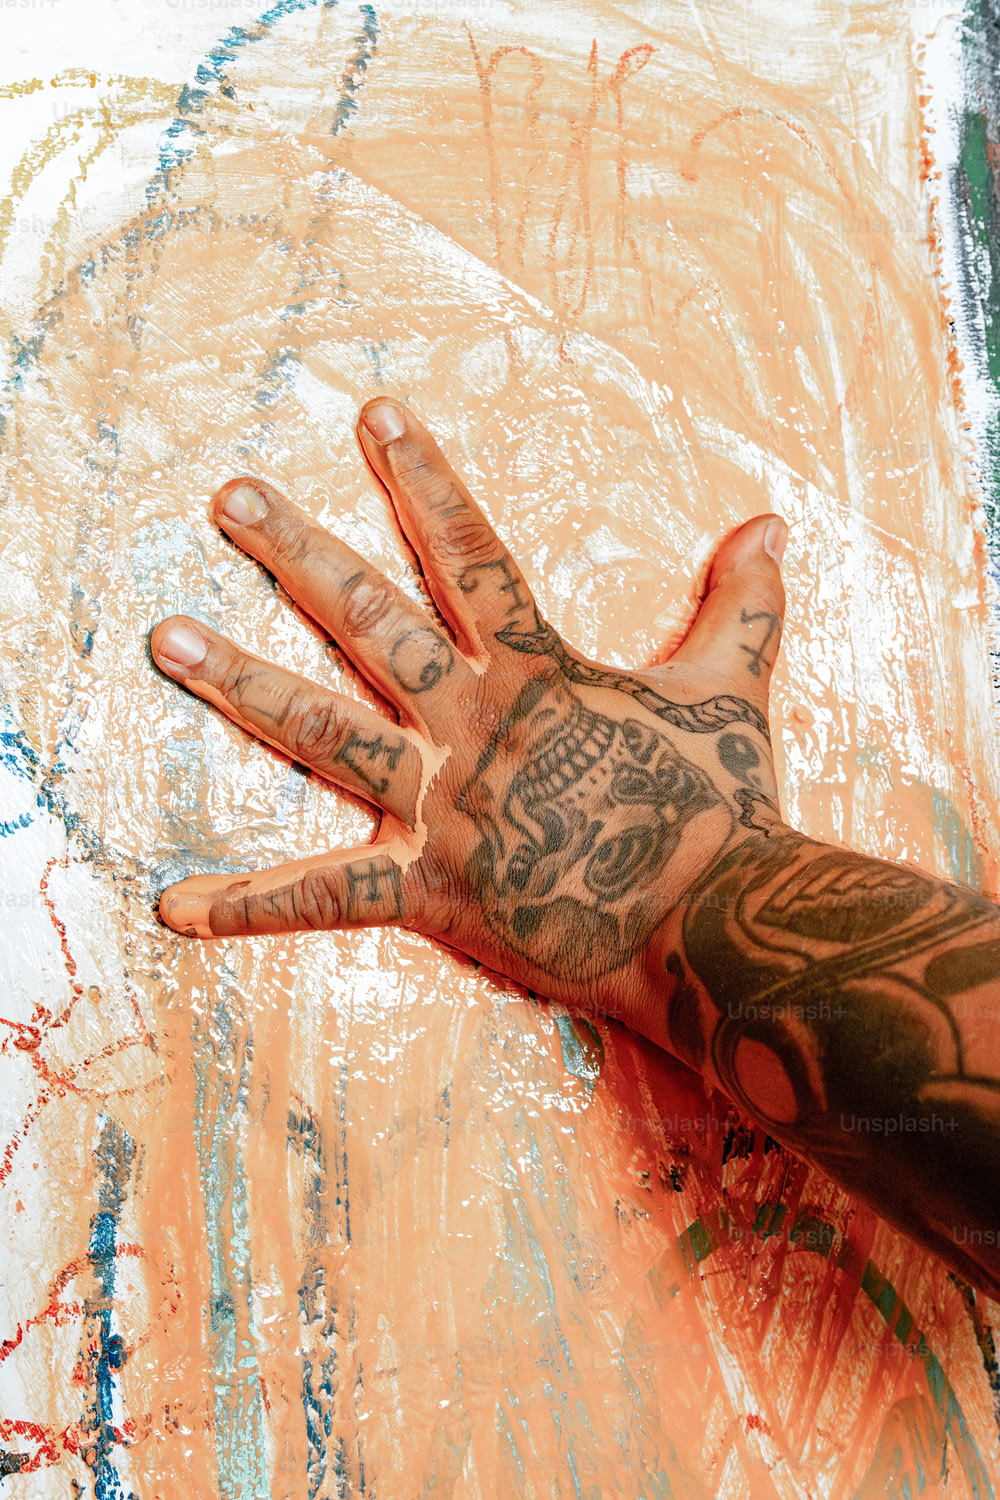 a person's hand with tattoos on it